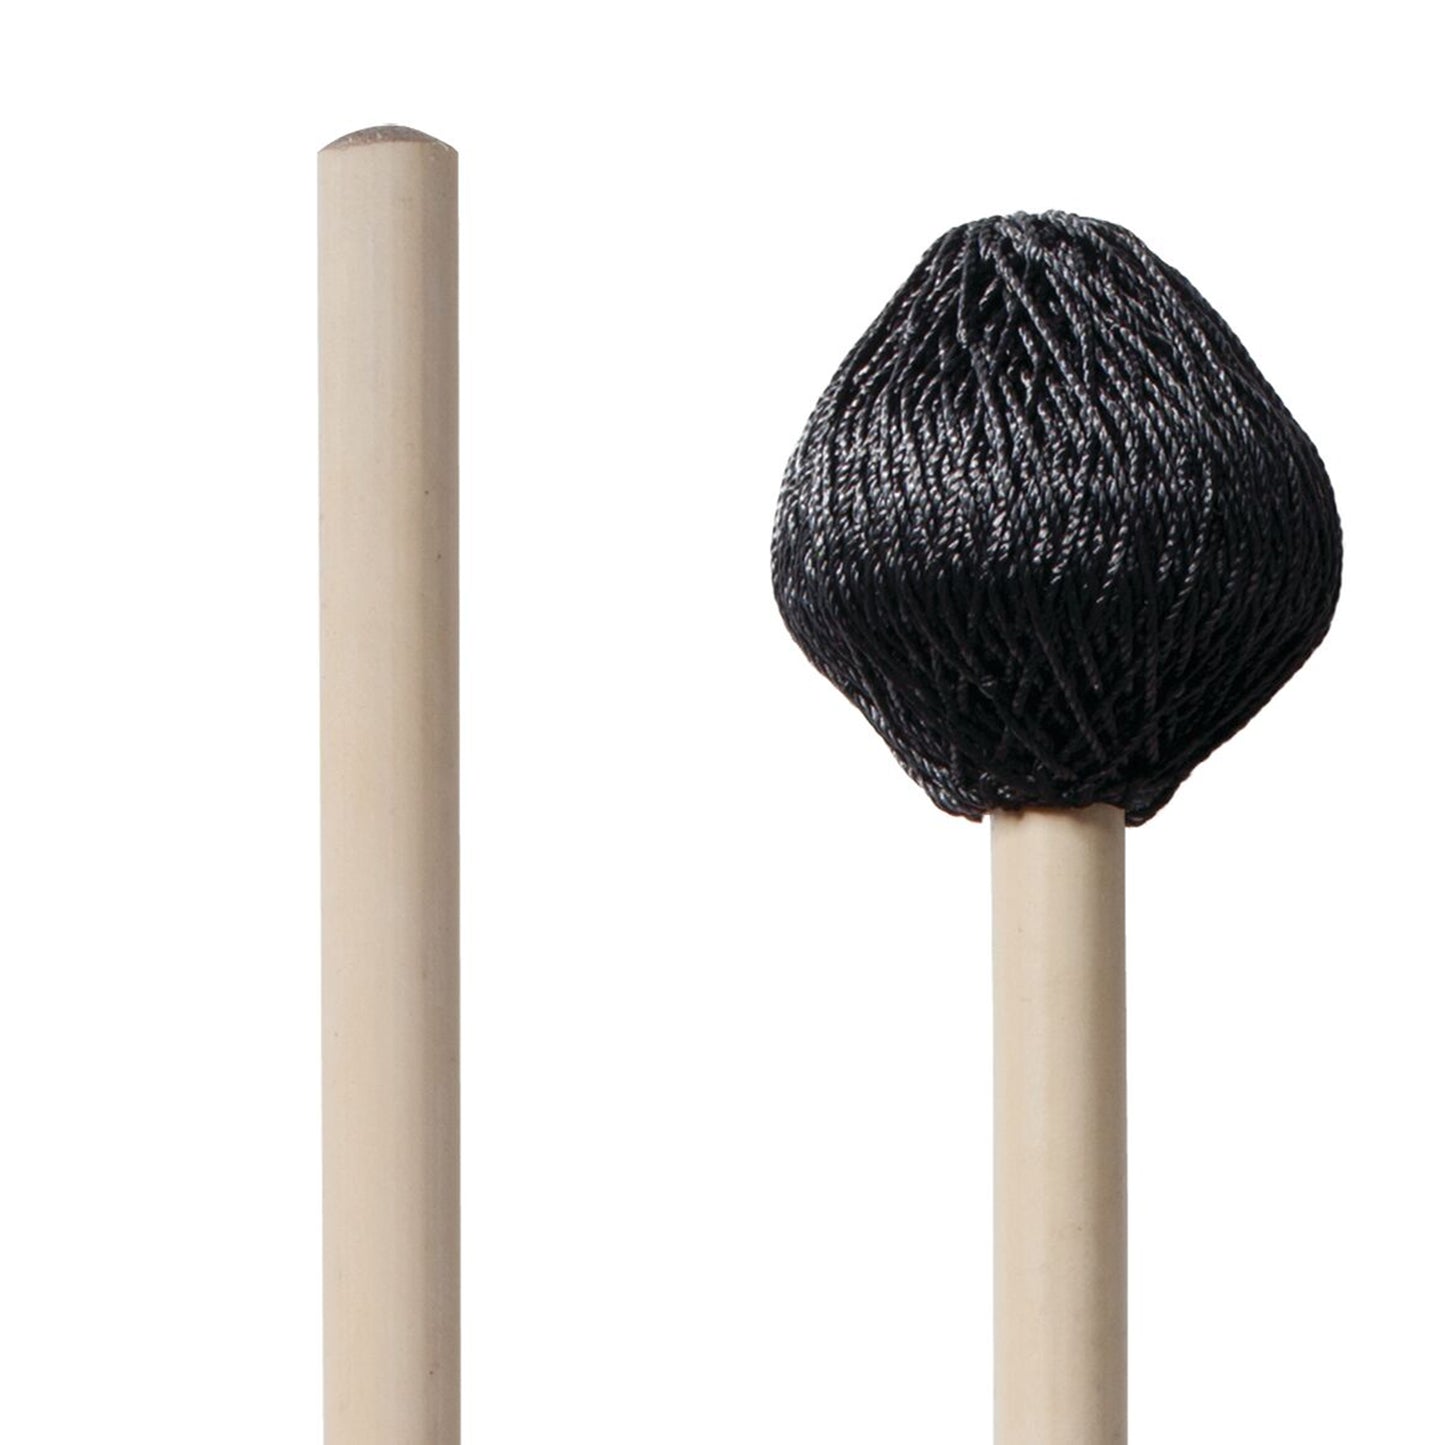 M186 - Corpsmaster Multi-Application Series - Medium, Weighted Rubber Core Mallets